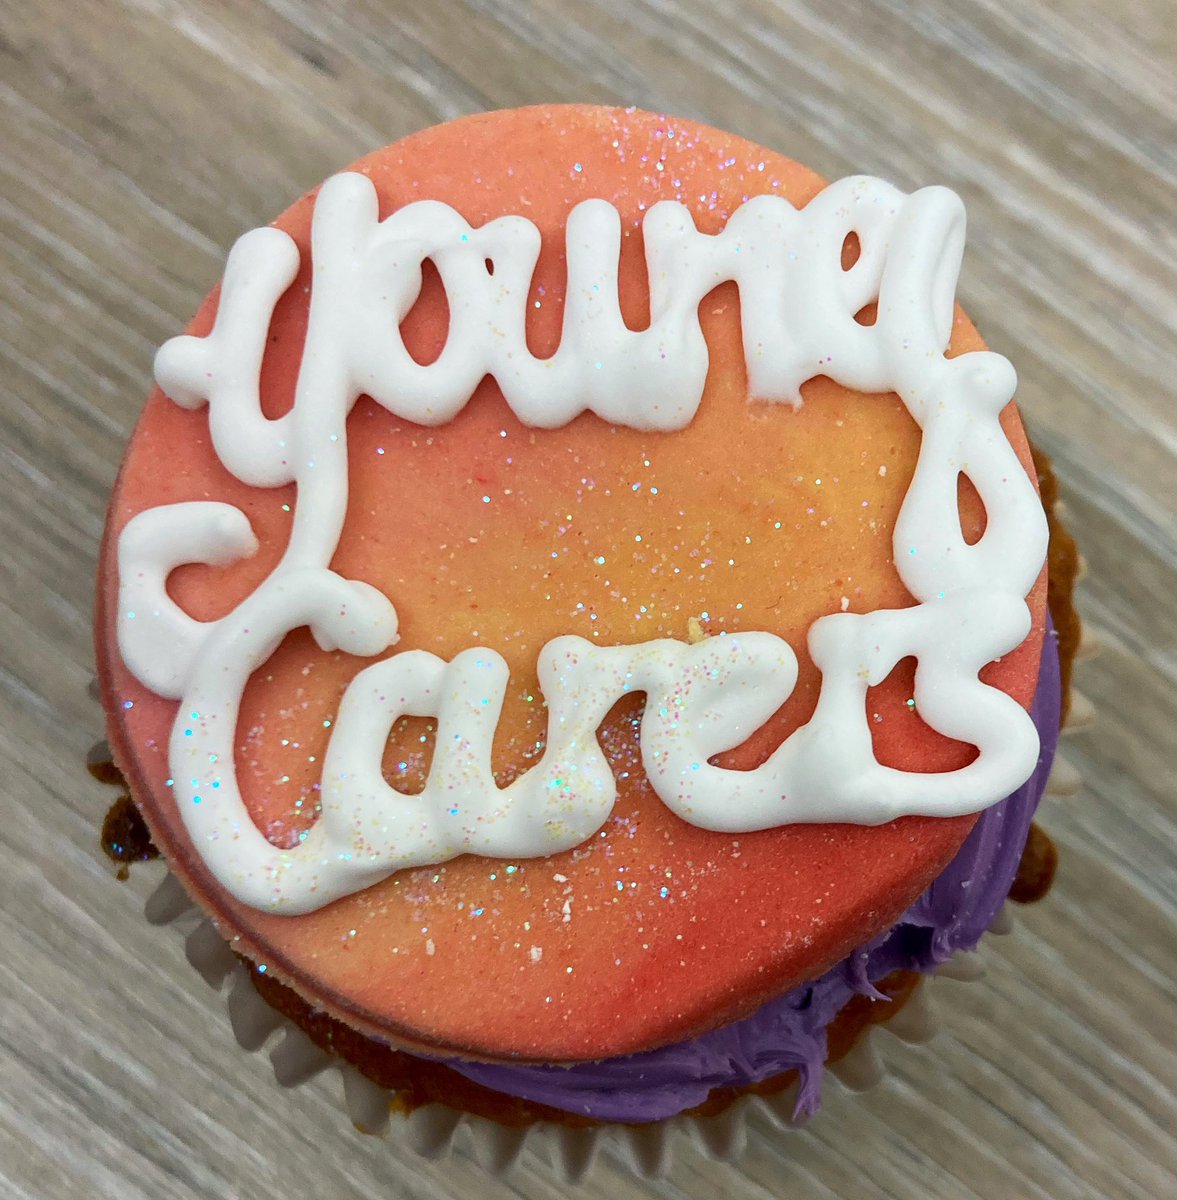 10 mins 🕑 to listen 👂have a caring conversation, 🗣can make all the difference  💜 Those working with children & yp are being asked to #maketimeforyoungcarers as part of #YoungCarersActionDay,  proud to be supporting our amazing 🤩 @ysortit Young Carers 🙌💜 @LyndseyYsi